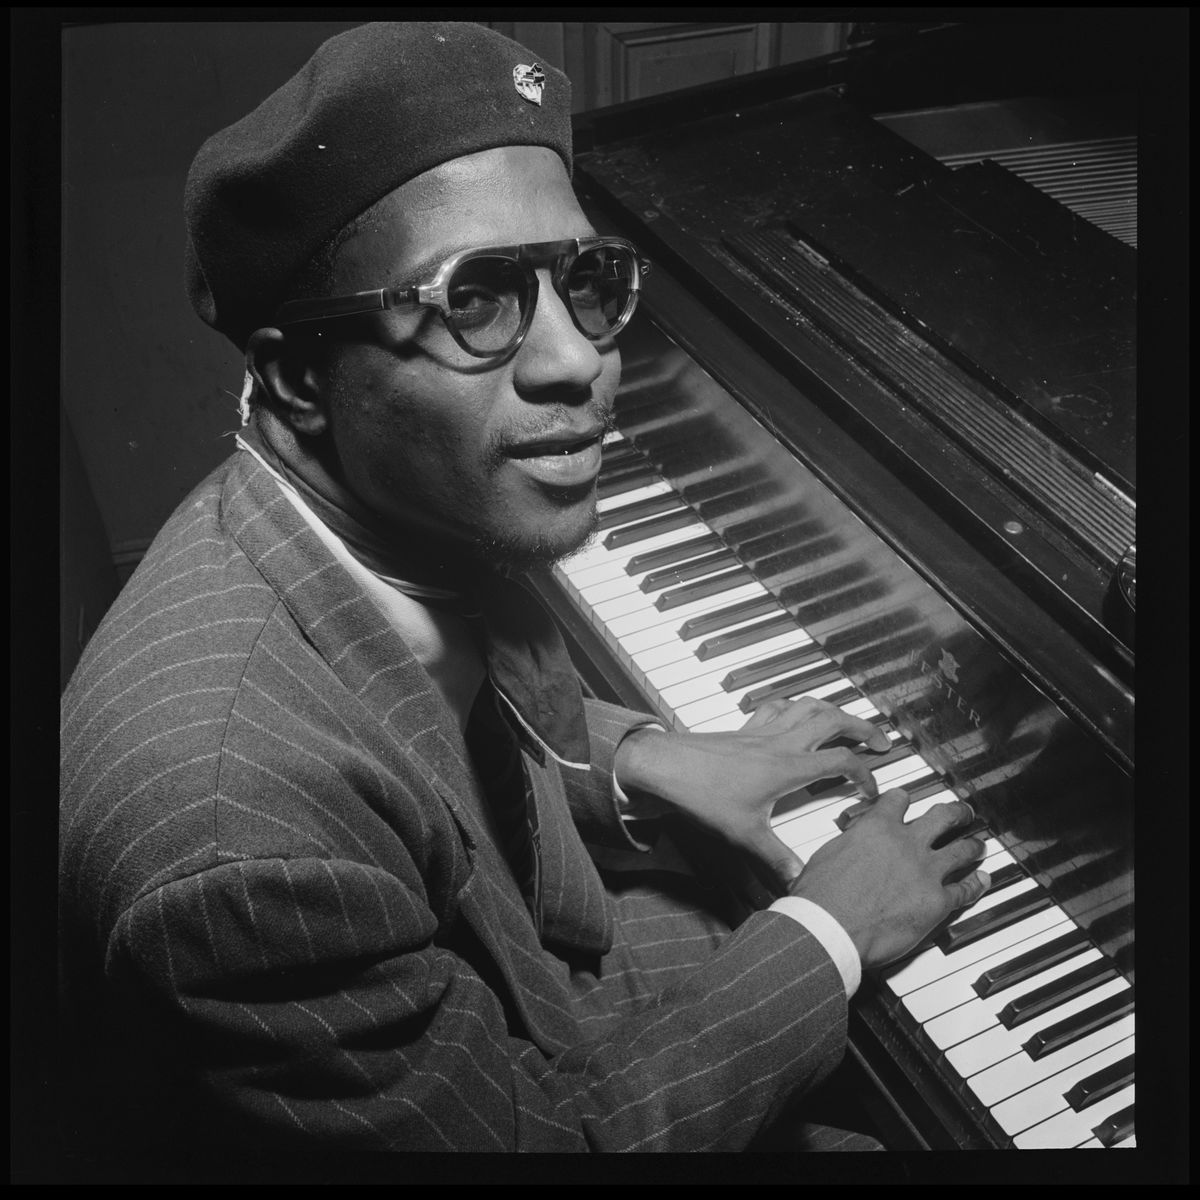 Portrait of Thelonious Monk, Minton's Playhouse by William P. Gottlieb - 1947